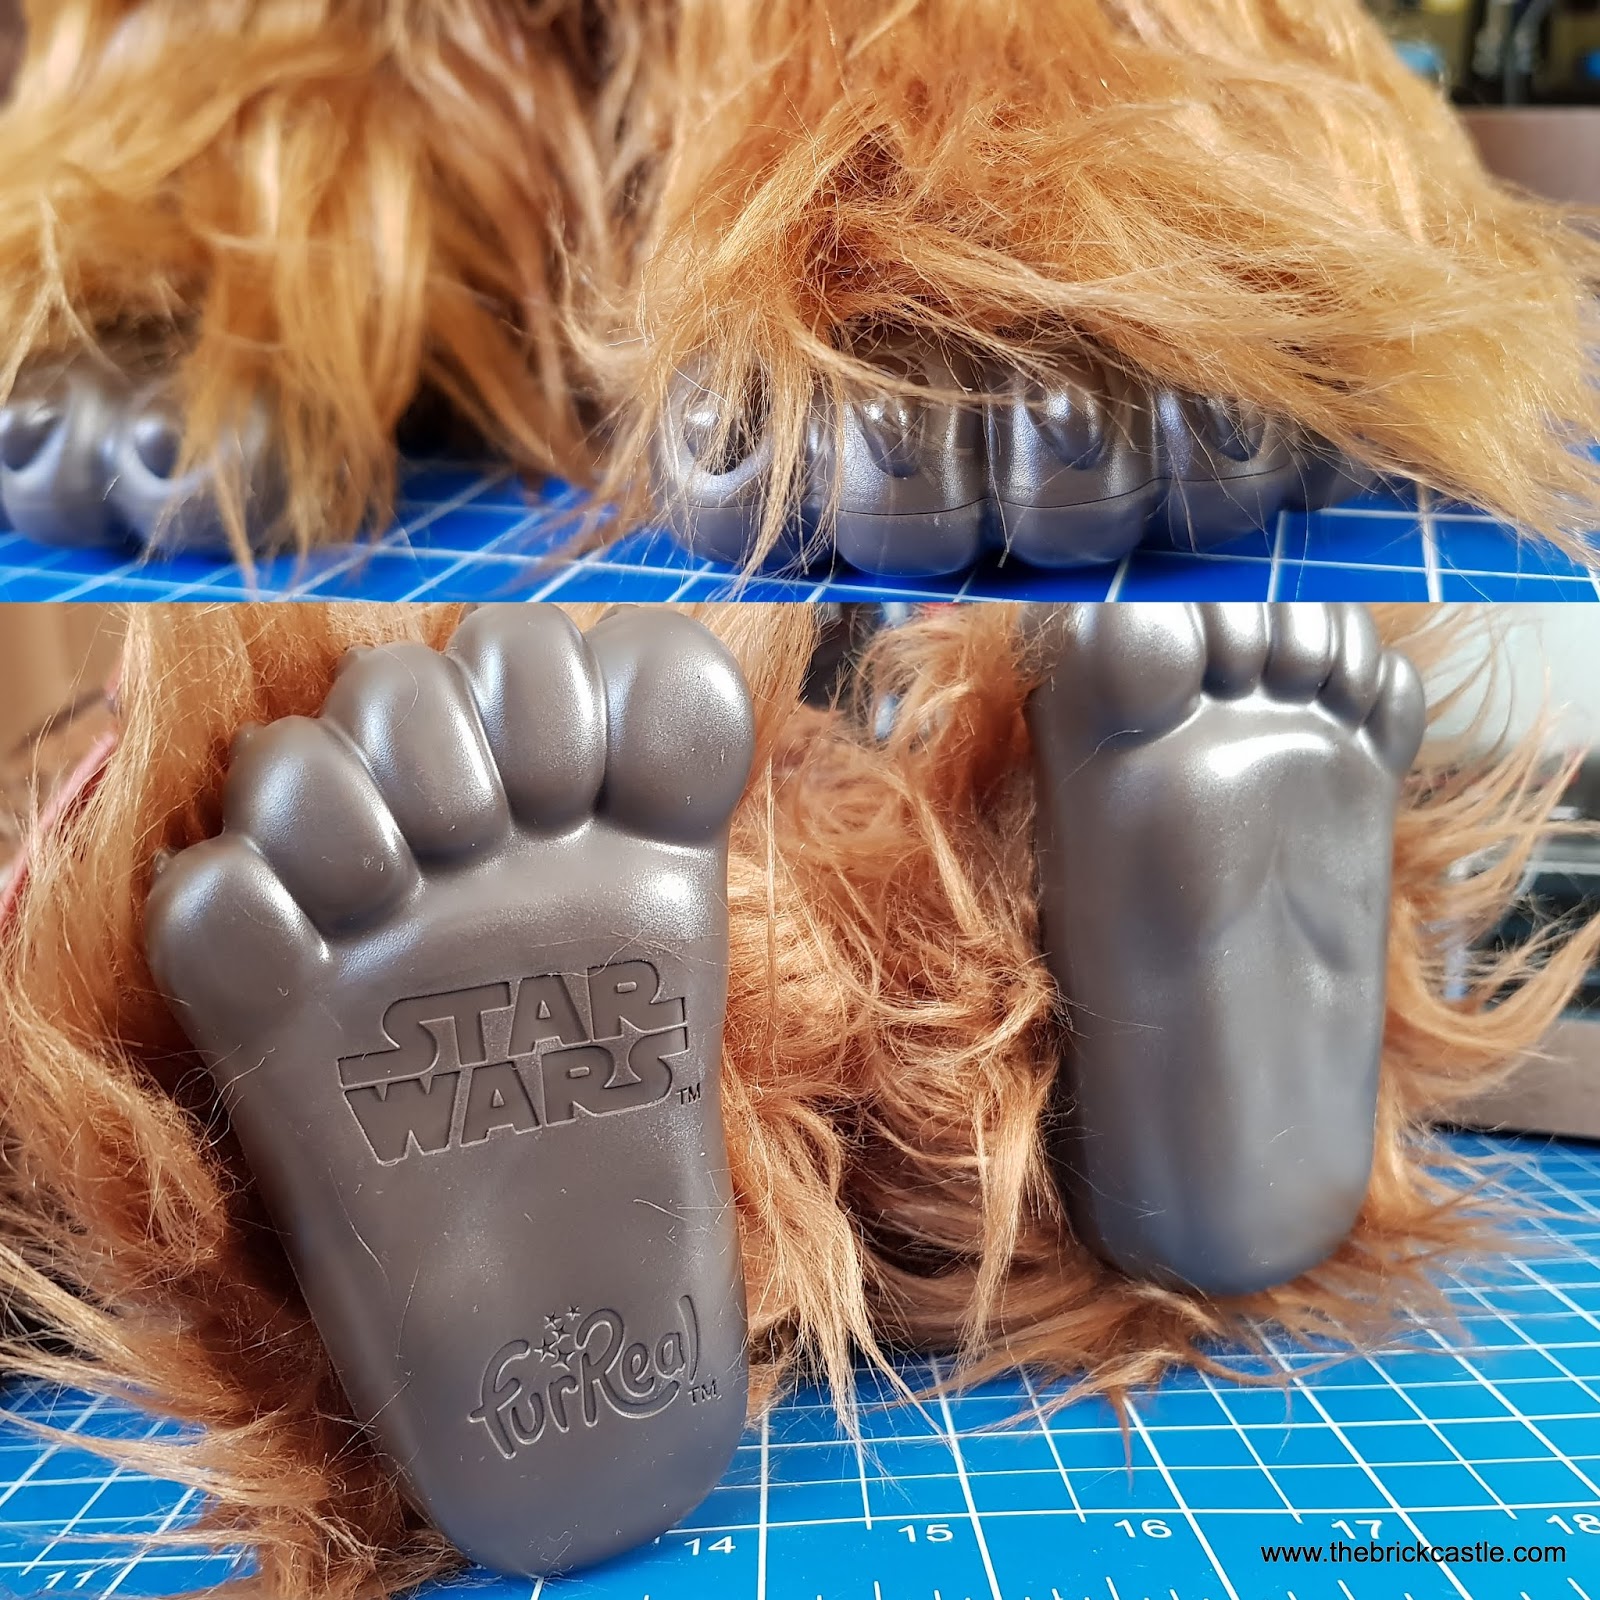 The Brick Castle: Star Wars Ultimate Co-pilot Chewie Interactive 